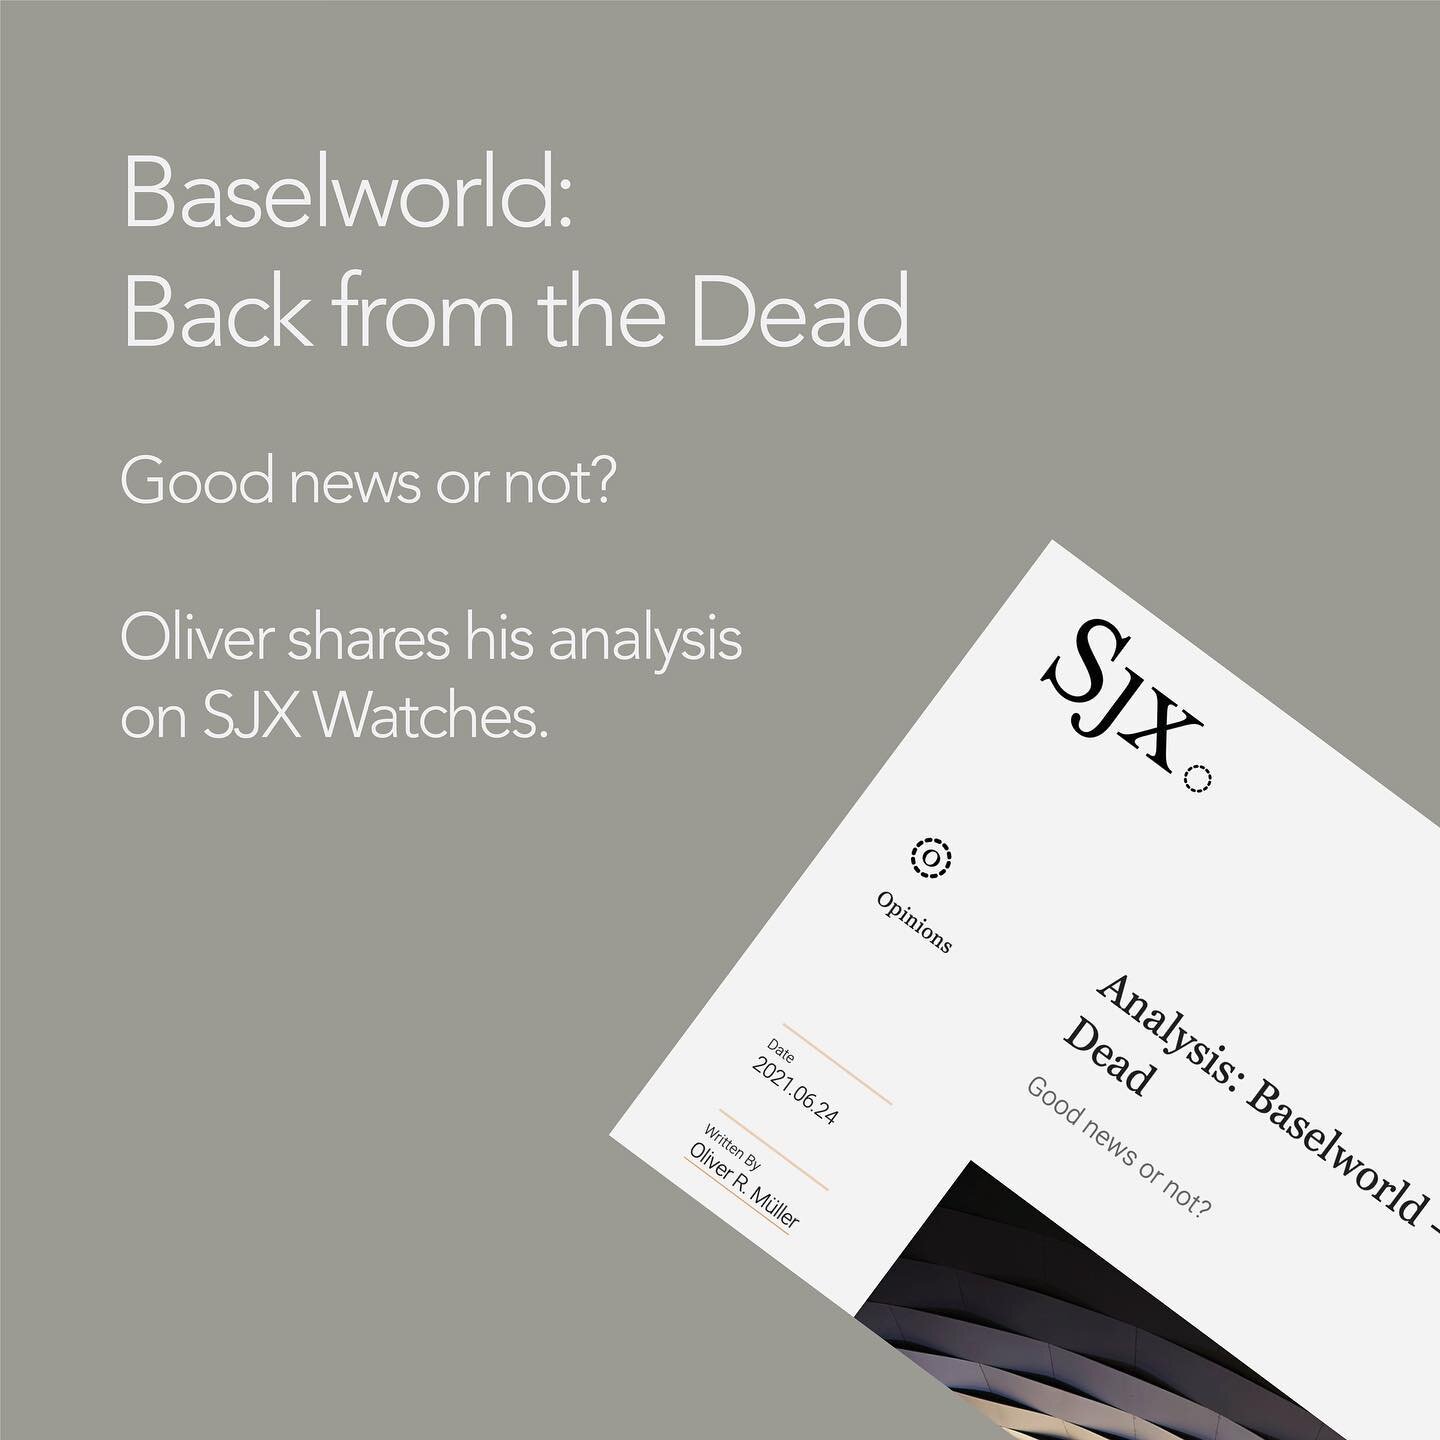 Baselworld &ndash; Back from the Dead
Good news or not?

Oliver has written an article published on @sjxwatches looking at the return of Baselworld, following MCH&rsquo;s announcement that the event will be relaunched in a new format come 2022.

He l